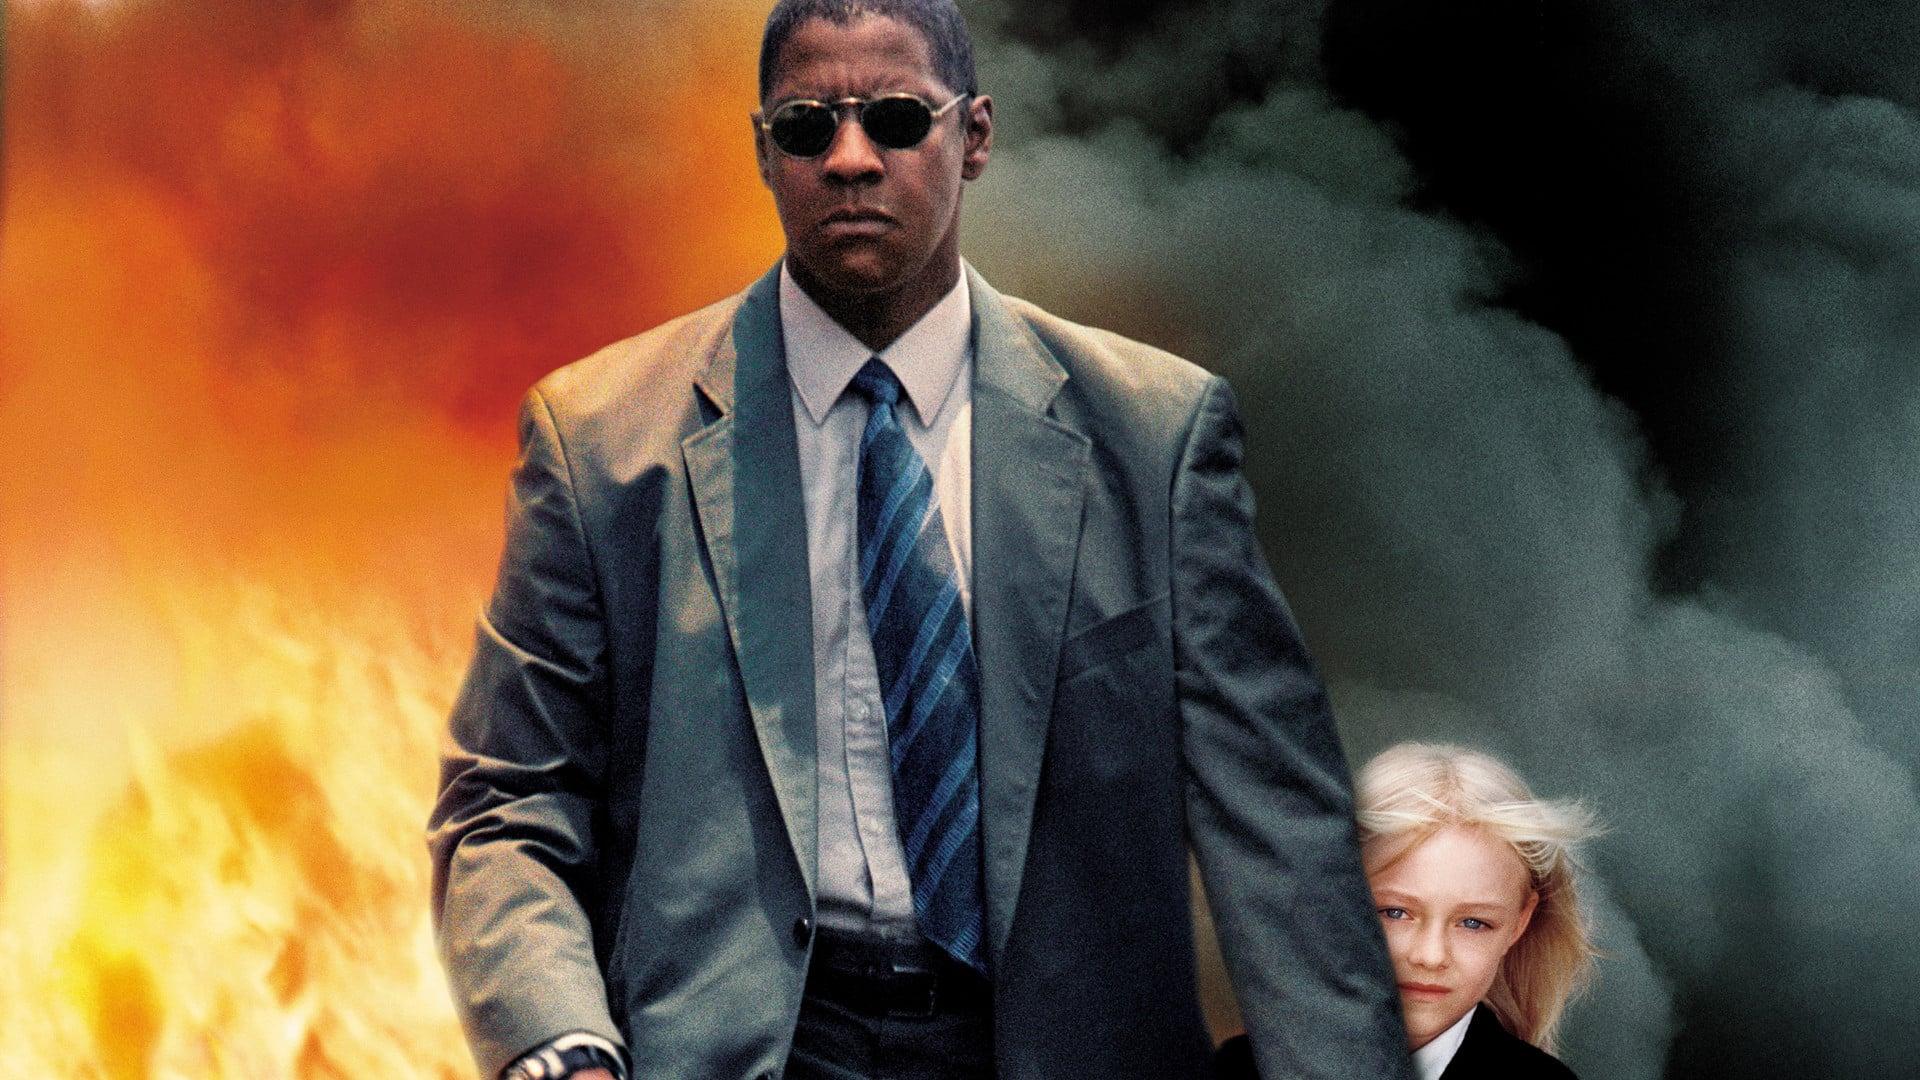 Backdrop Image for Man on Fire